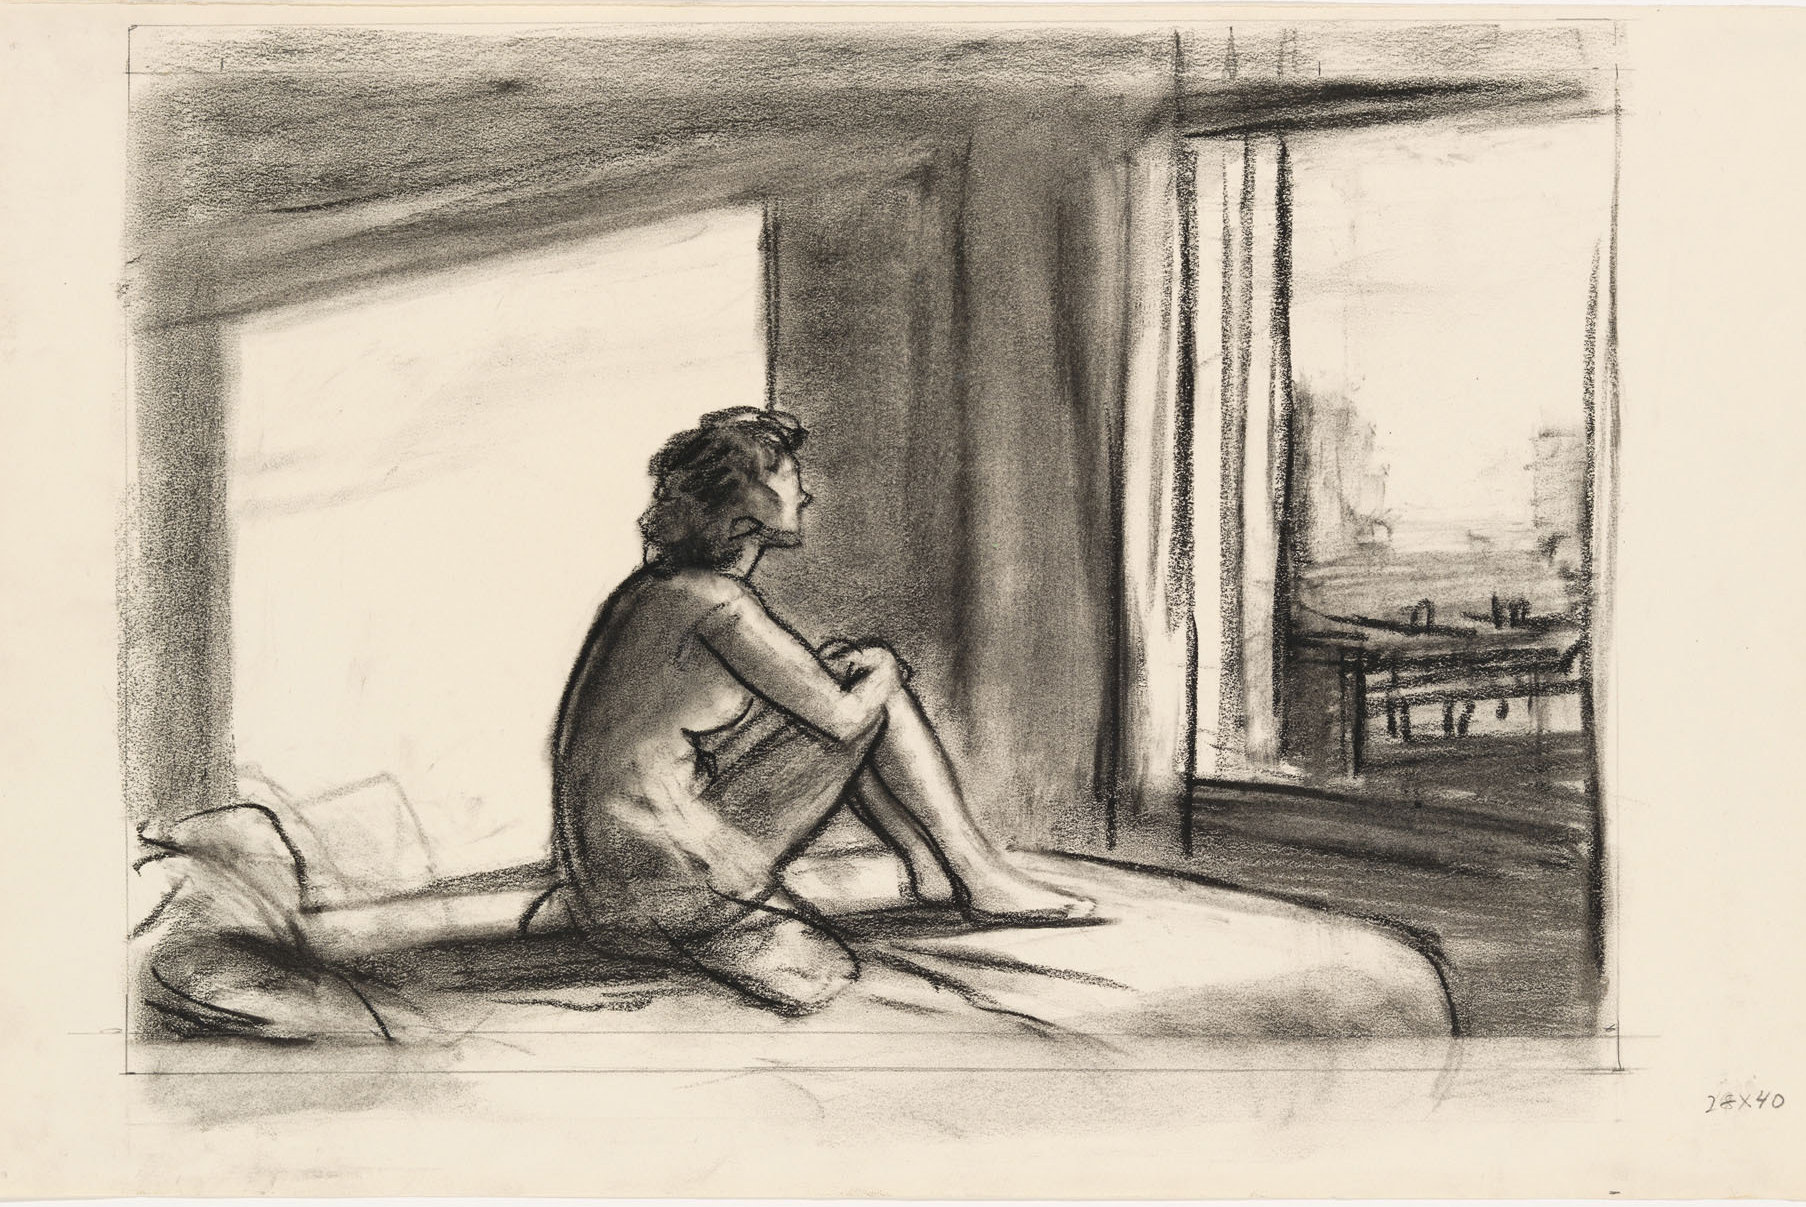 drawings Edward Hopper, Study for Morning Sun, 1952, Whitney Museum of American Art, New York, NY, USA.